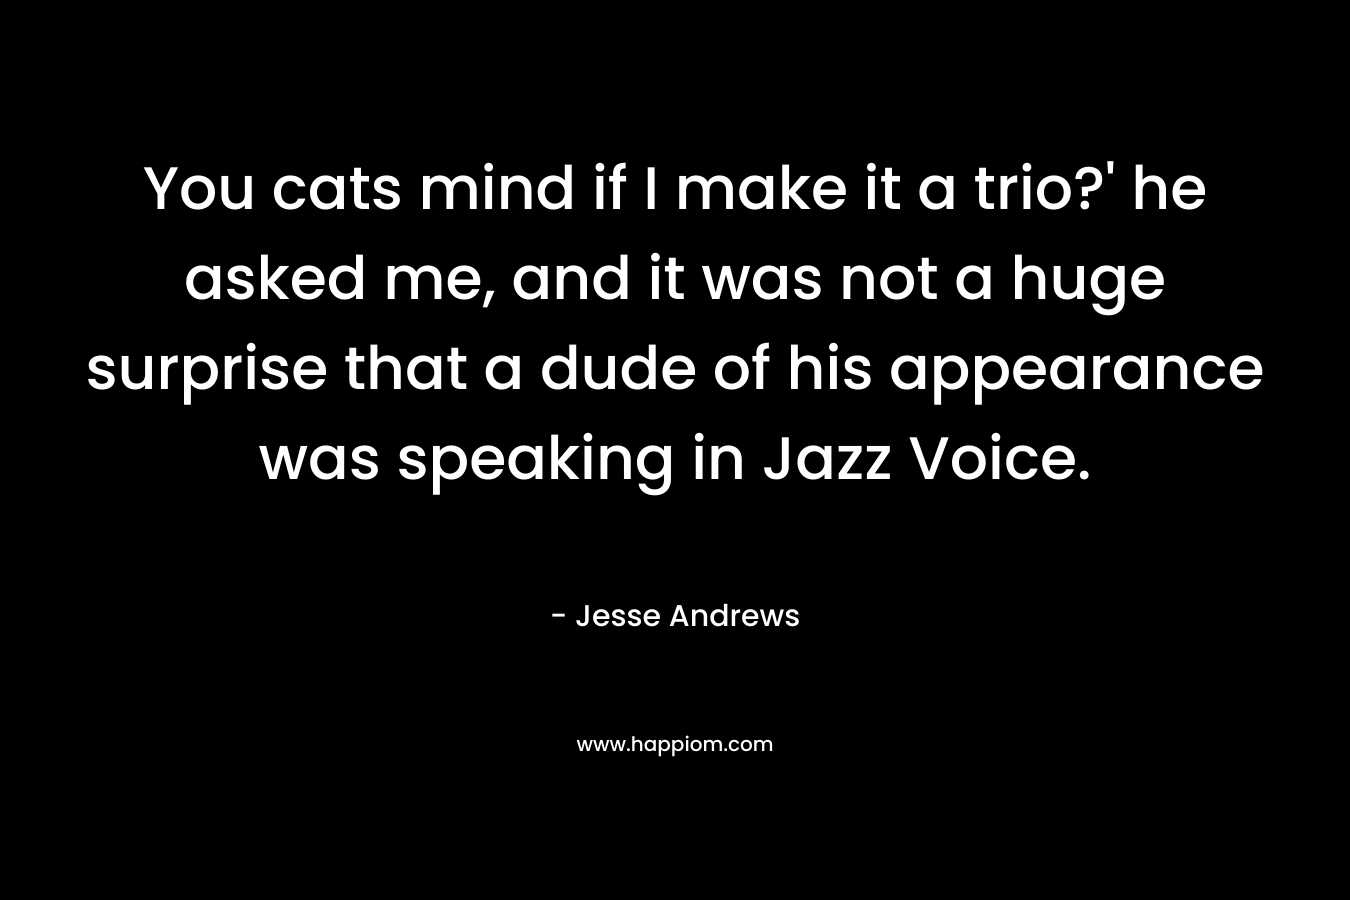 You cats mind if I make it a trio?’ he asked me, and it was not a huge surprise that a dude of his appearance was speaking in Jazz Voice. – Jesse Andrews